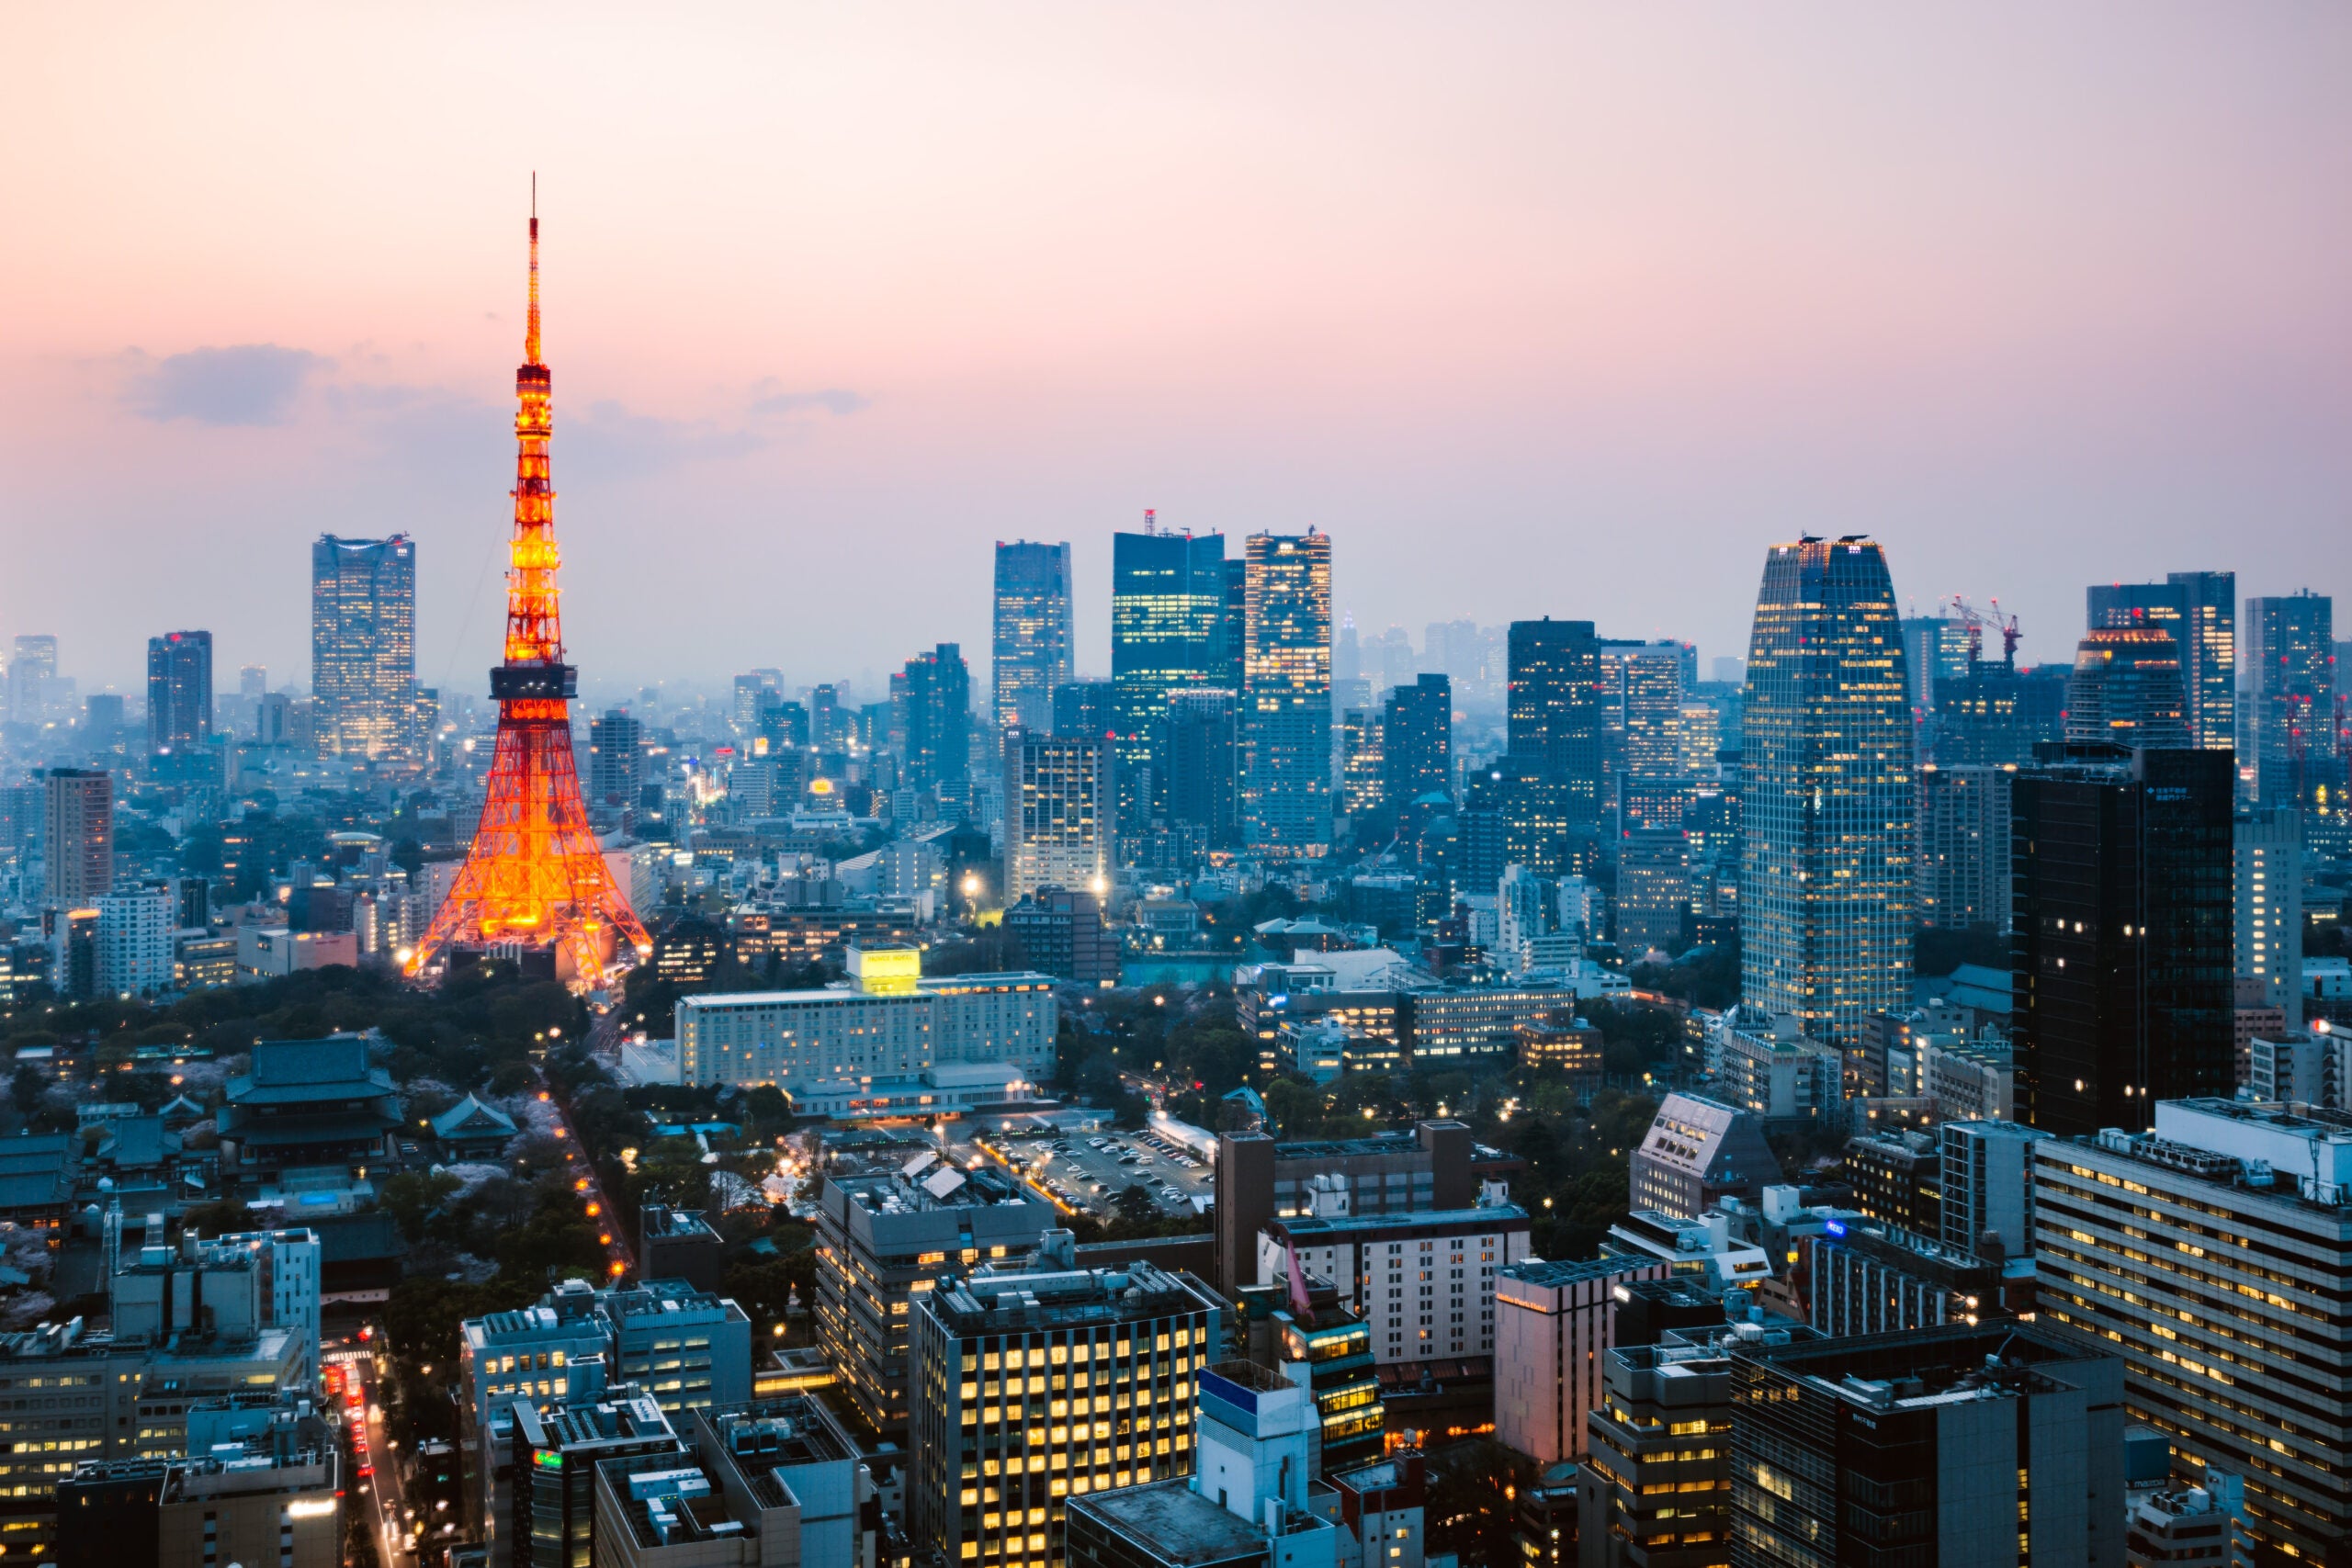 Japan deals: $555 in economy or ride in ANA’s The Room for $2,700